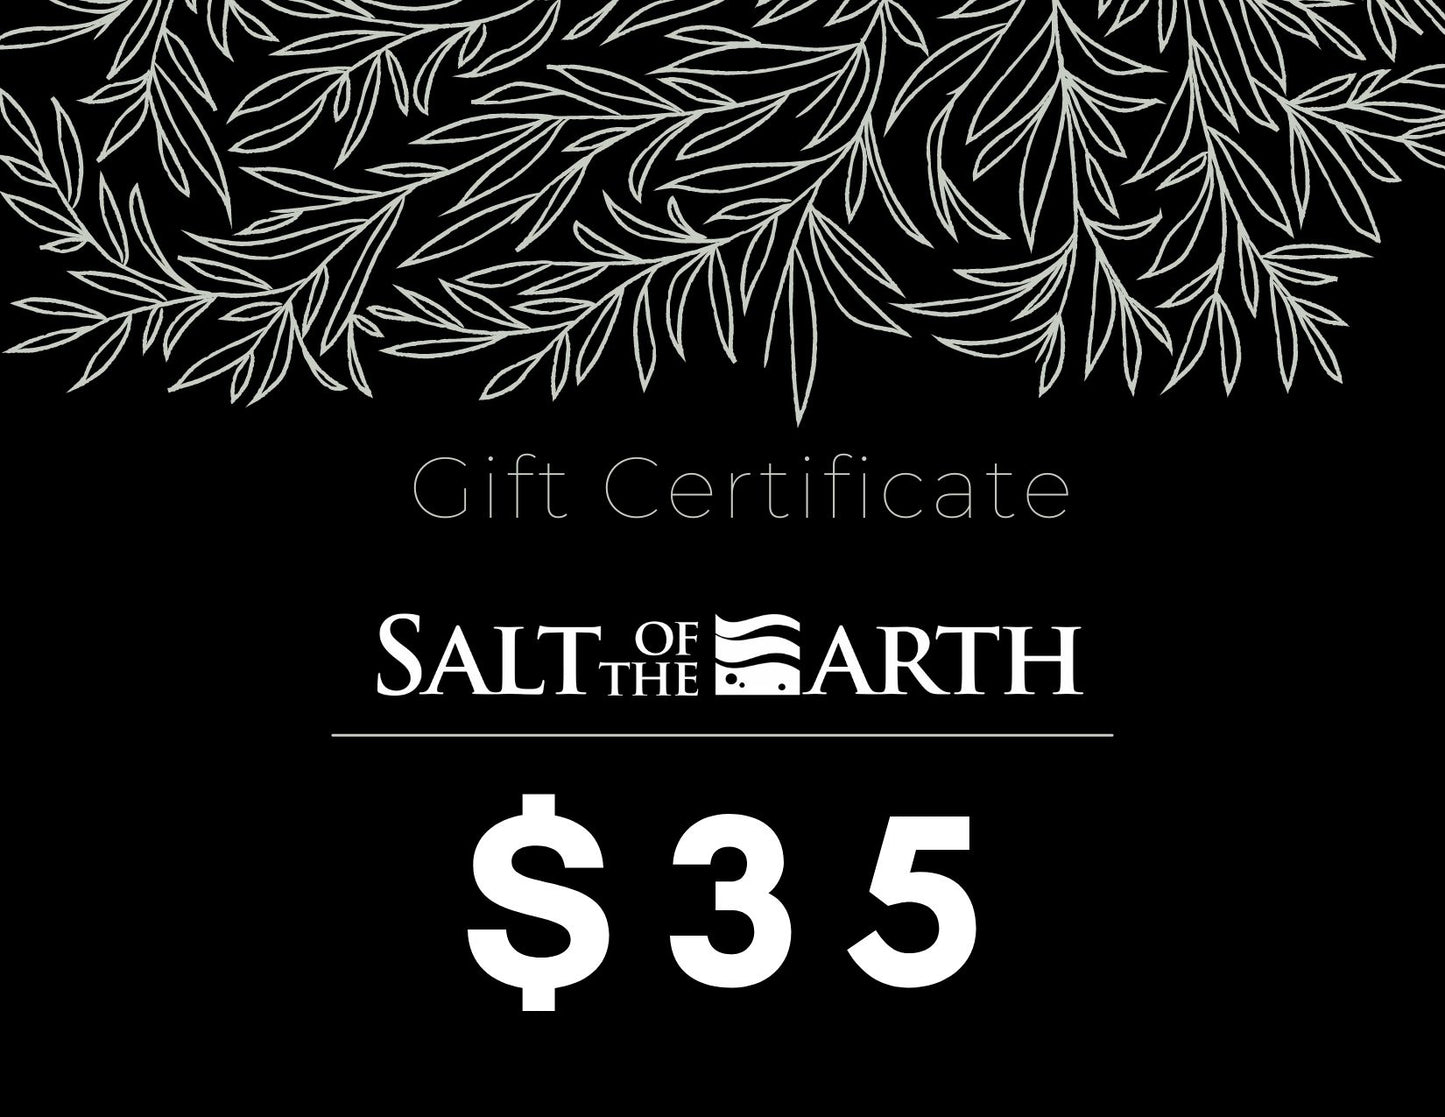 SALT OF THE EARTH NATURAL SKINCARE INSTANT GIFT CERTIFICATE - SALT OF THE EARTH